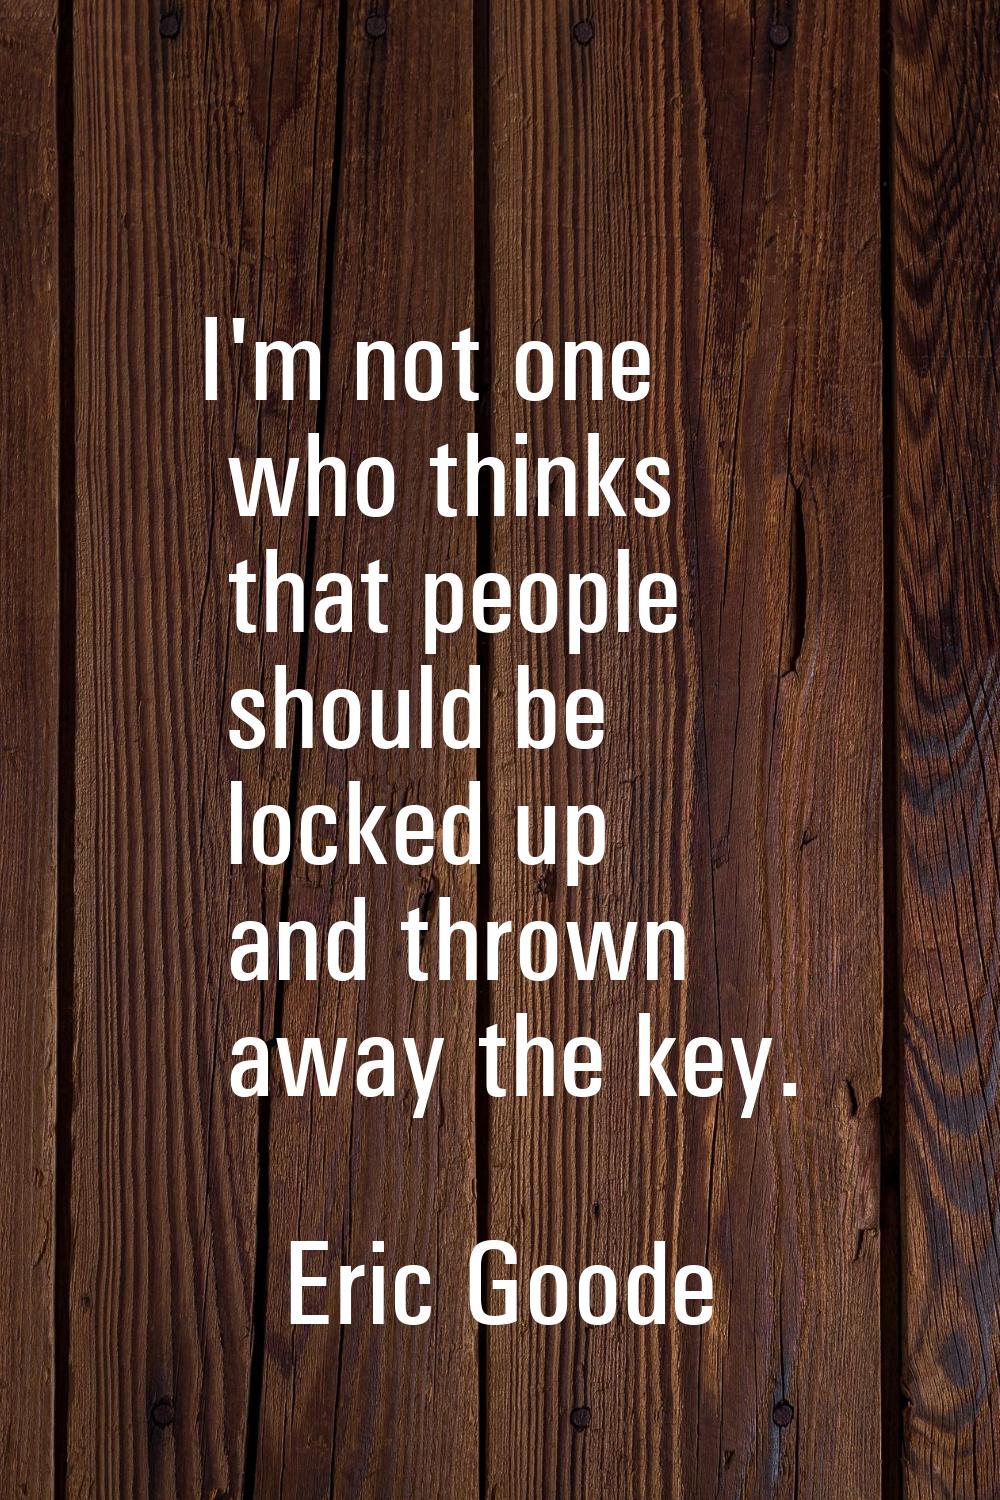 I'm not one who thinks that people should be locked up and thrown away the key.